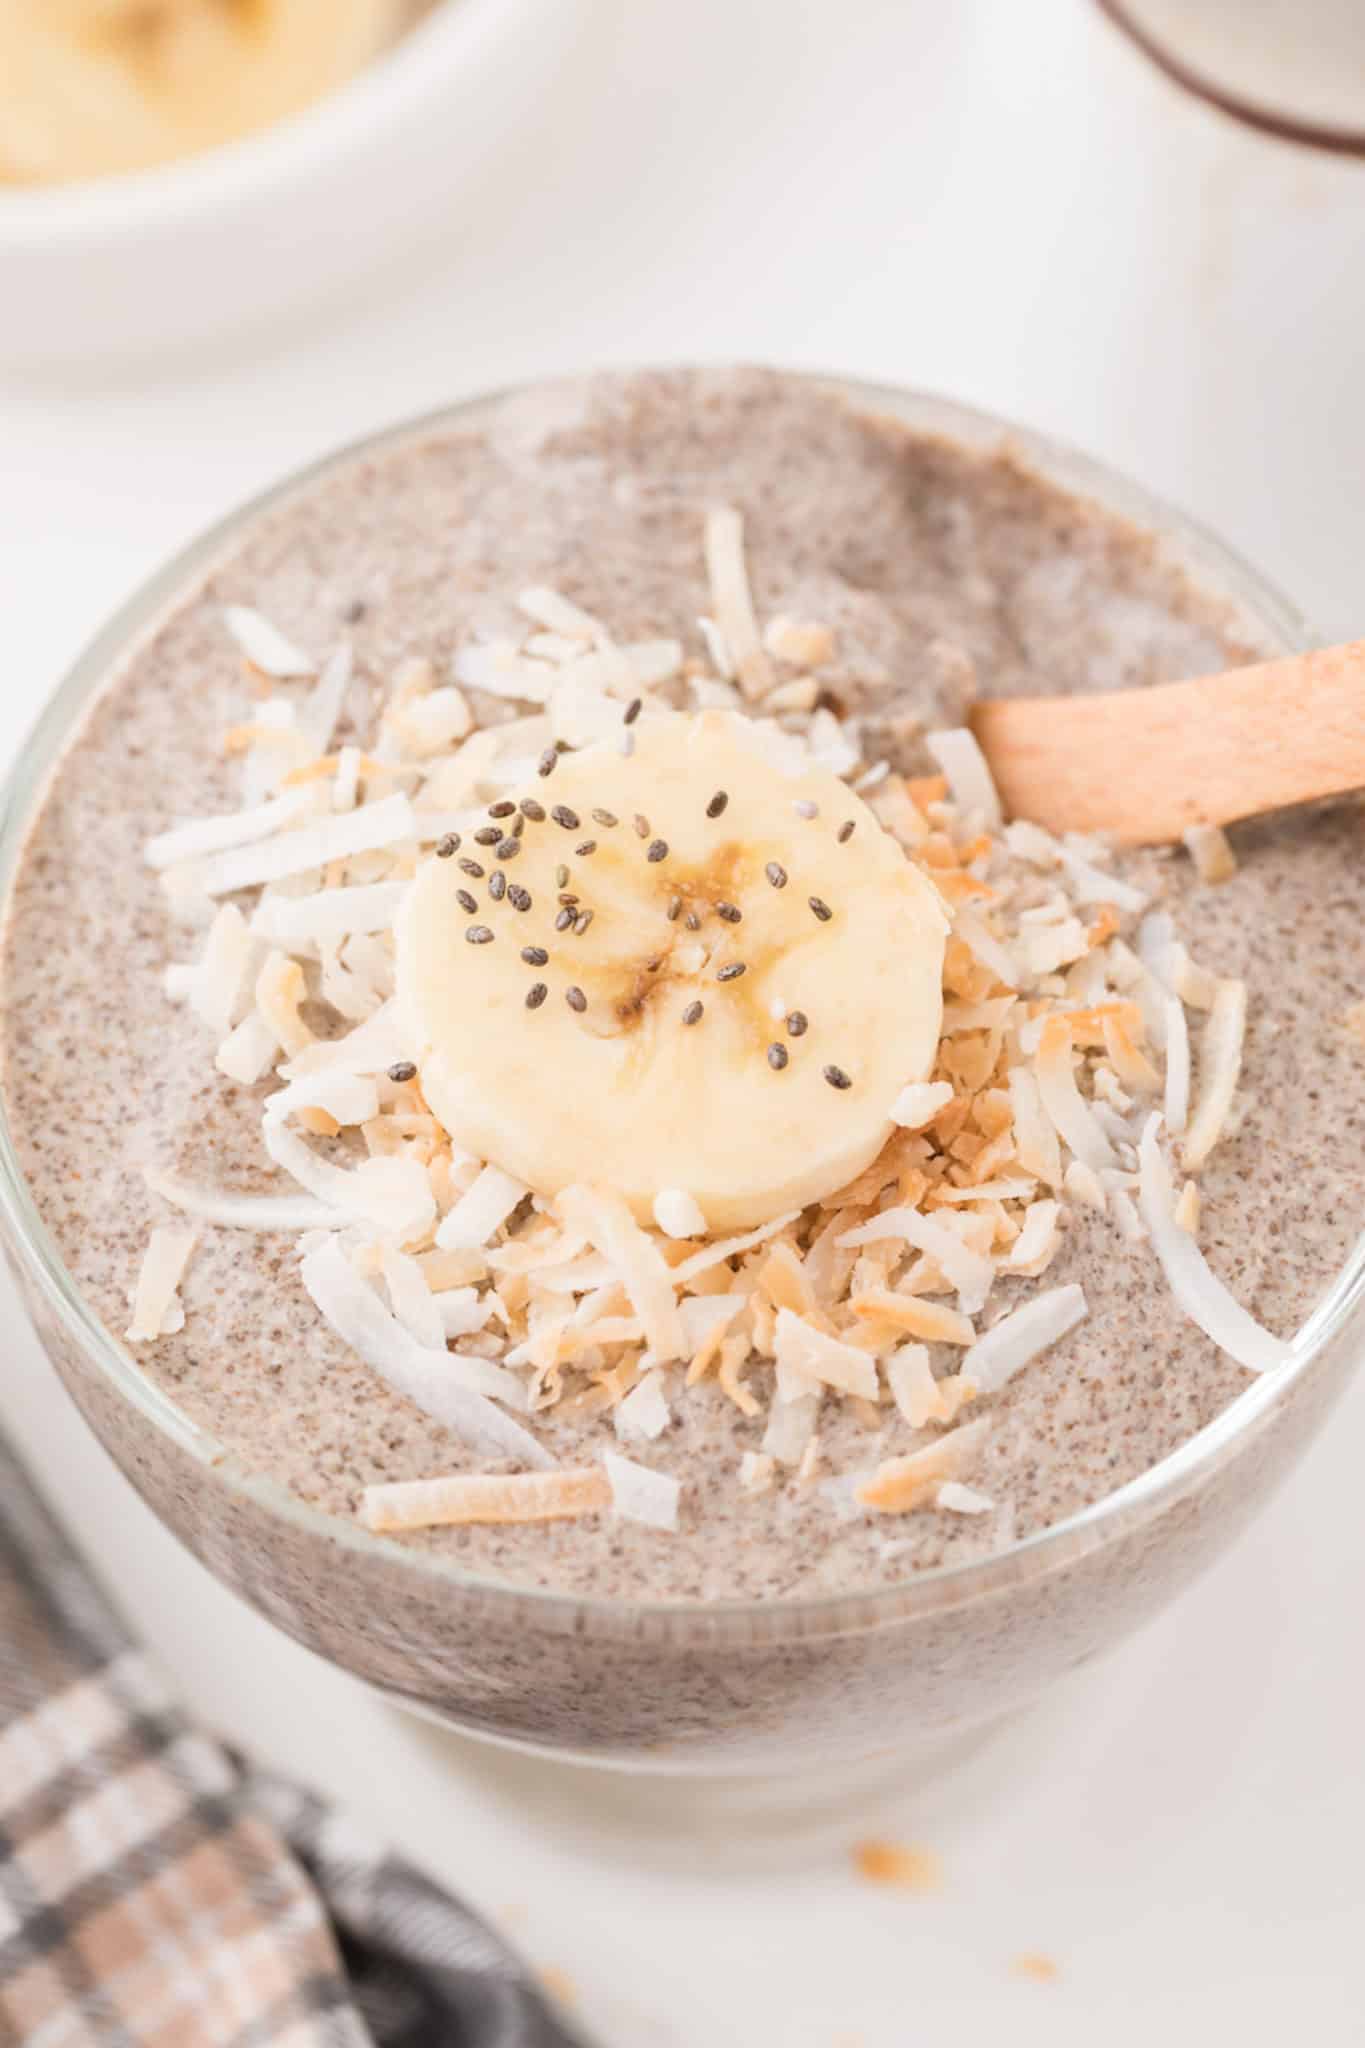 chia pudding with banana and coconut on top